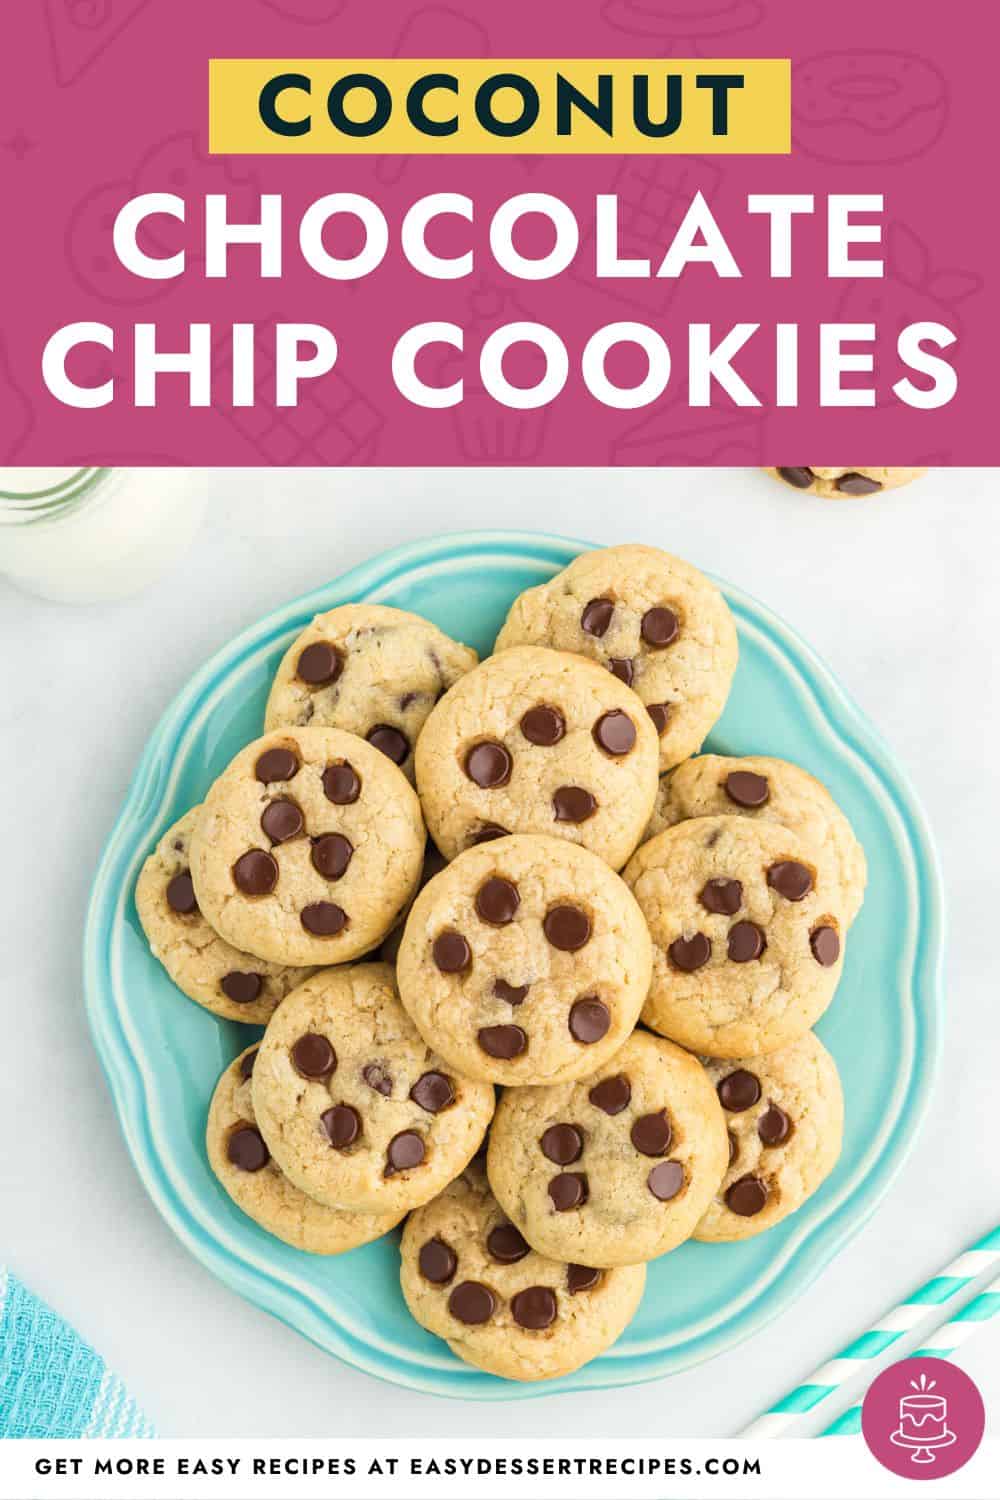 Coconut chocolate chip cookies on a plate.